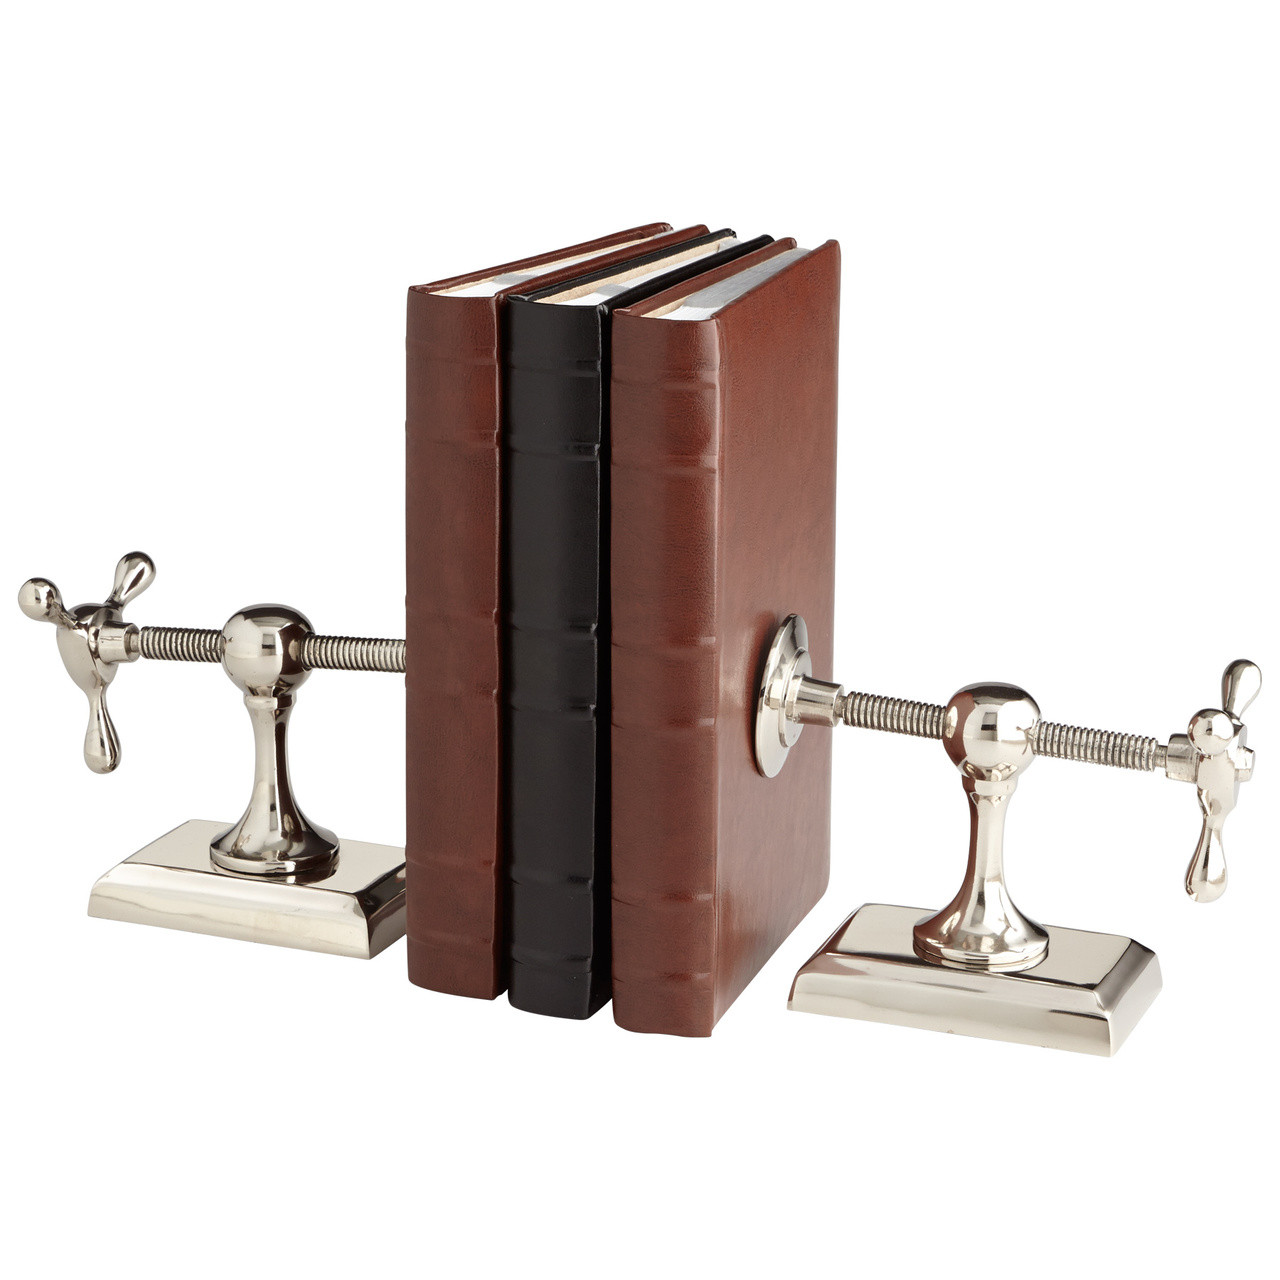 CYAN DESIGN 07034 Hot & Cold Bookends, Nickel